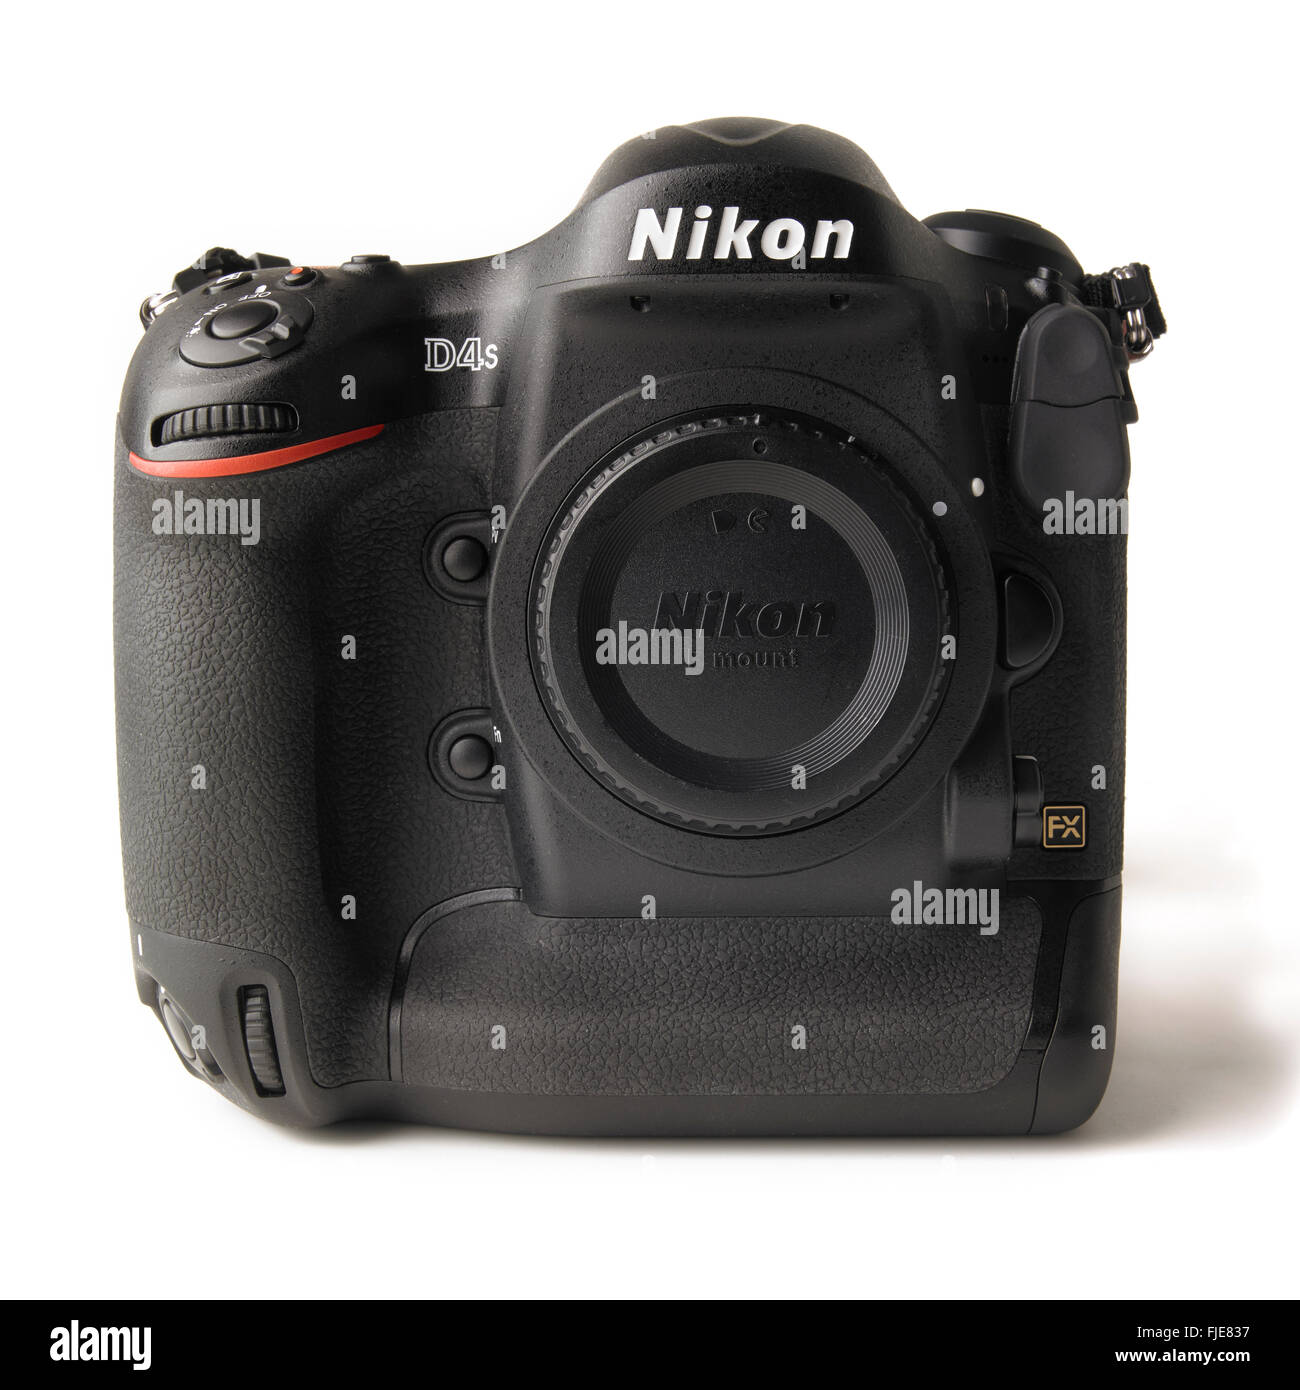 Nikon D4s dslr camera body on white background, Nikon’s flagship camera when introduced in 2014. Stock Photo